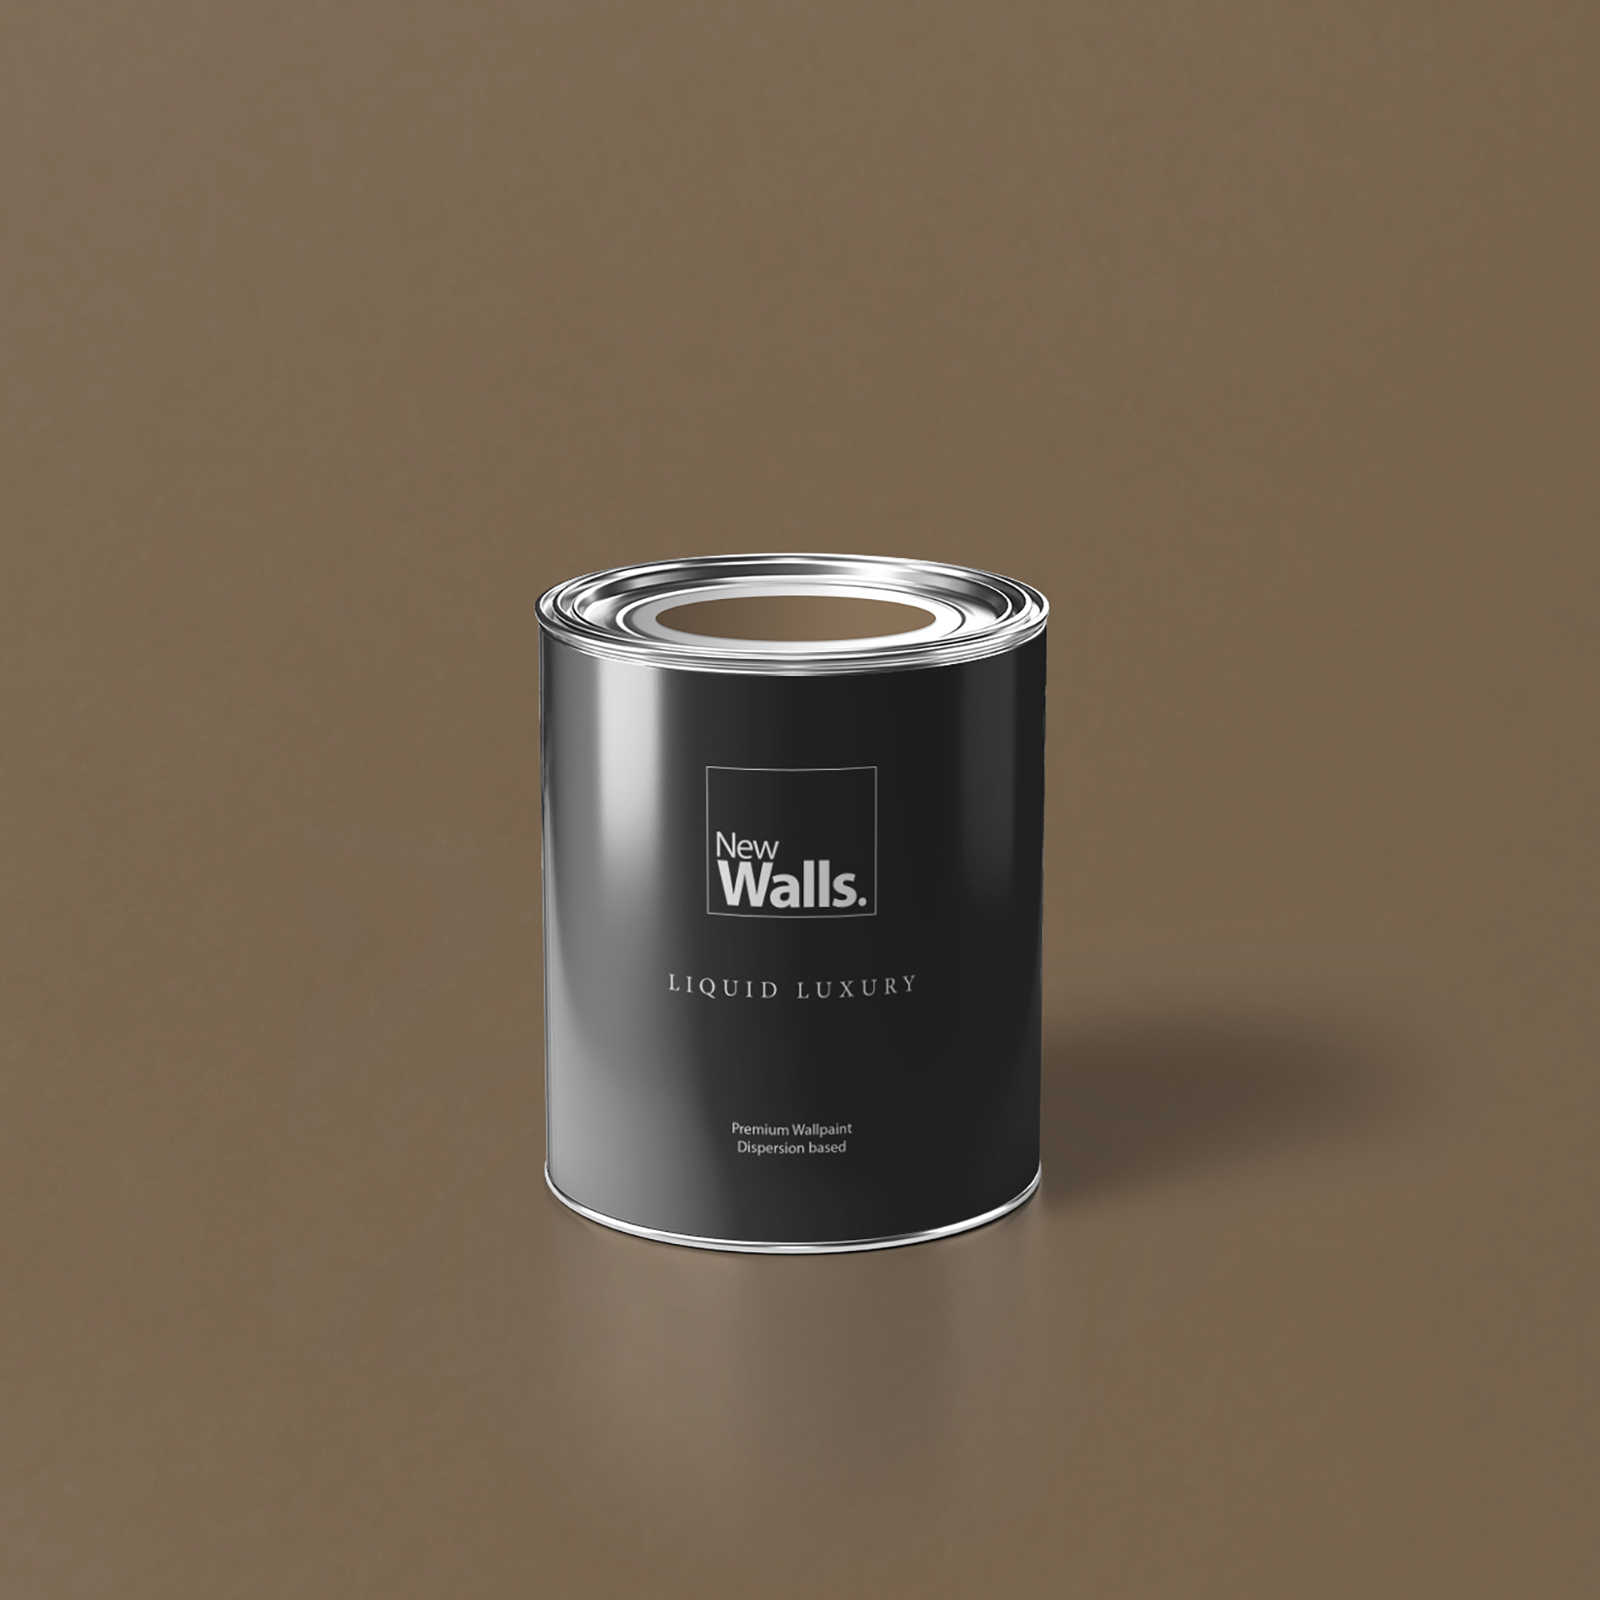         Premium Wall Paint Soothing Brown »Essential Earth« NW711 – 1 litre
    